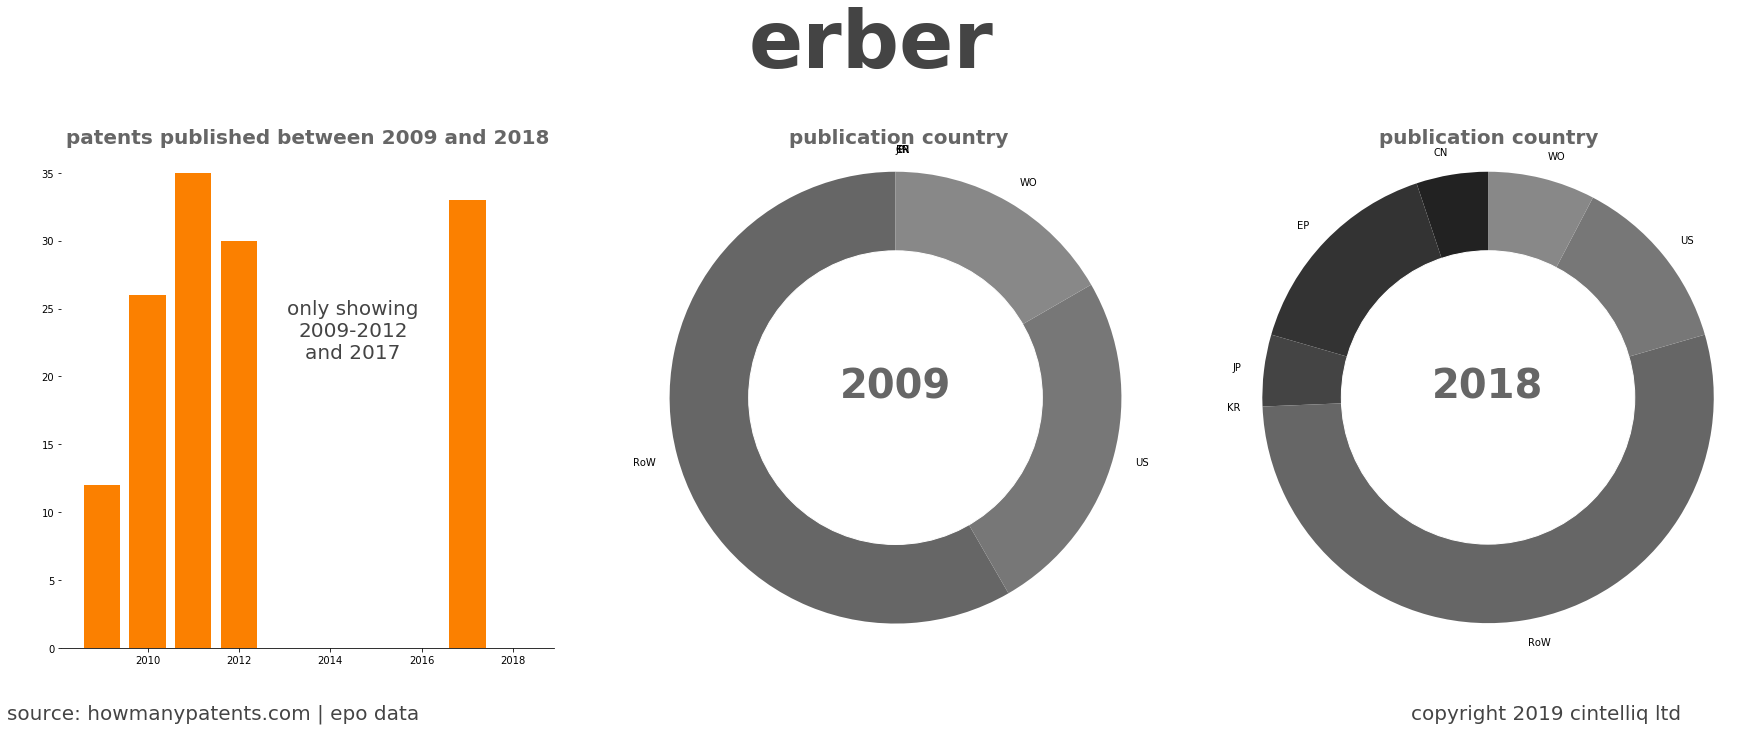 summary of patents for Erber